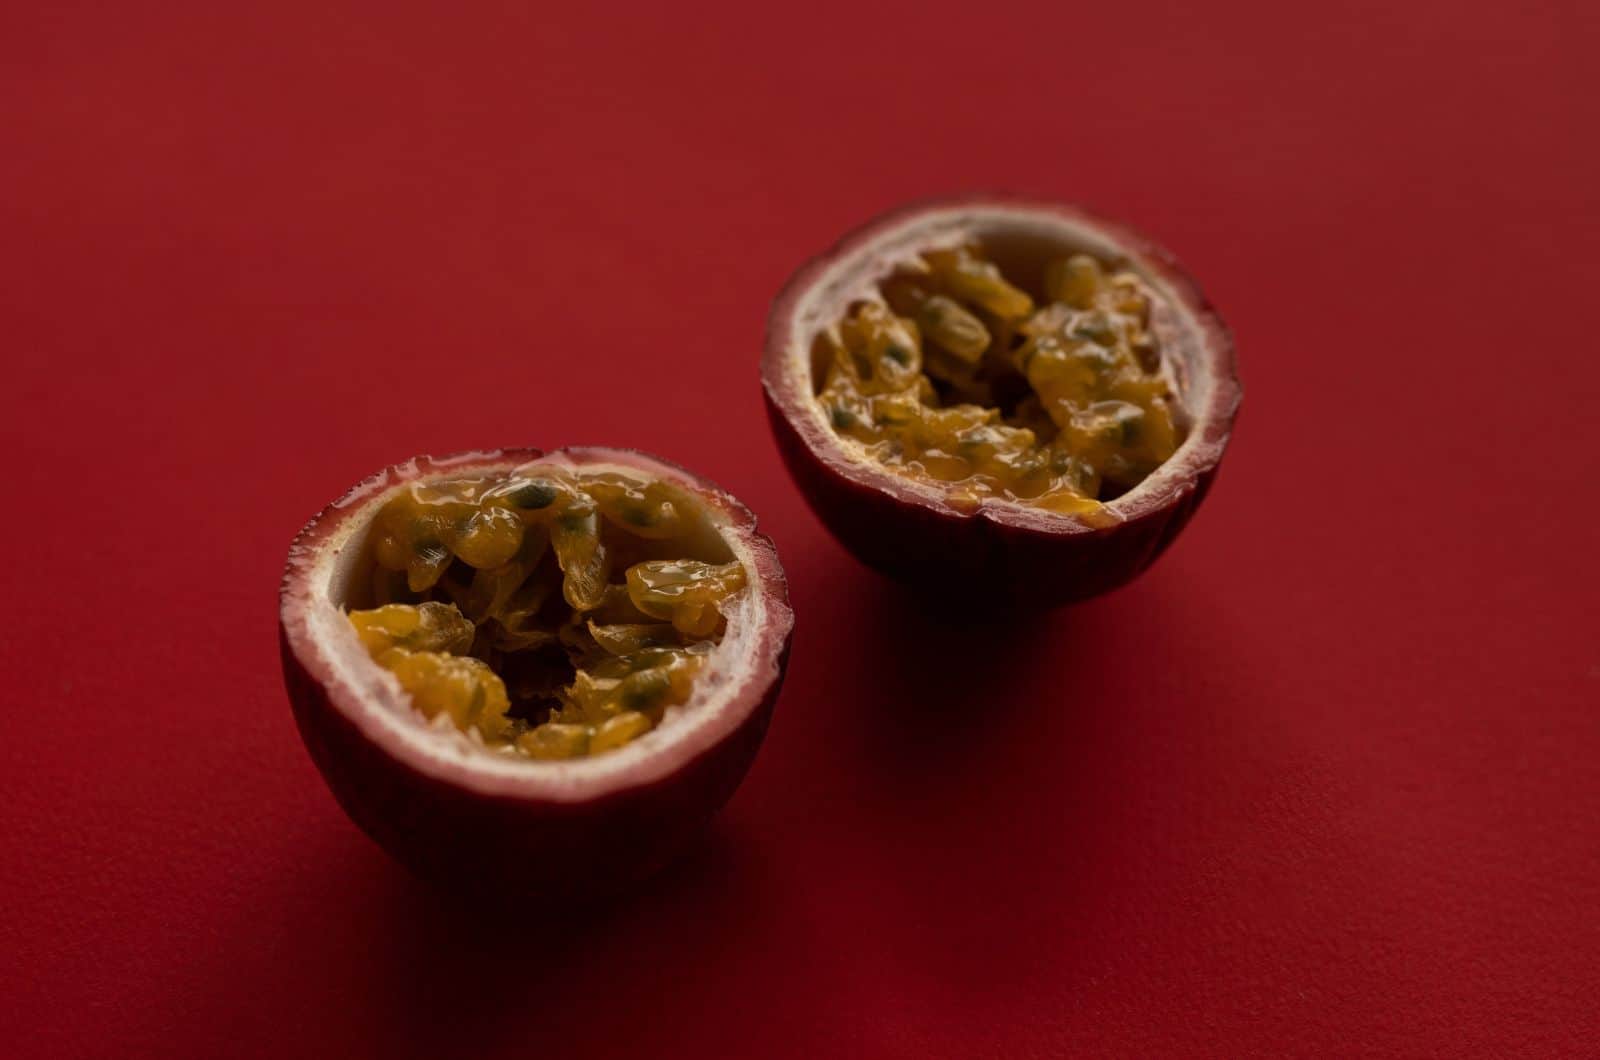 Passion Fruit on red background